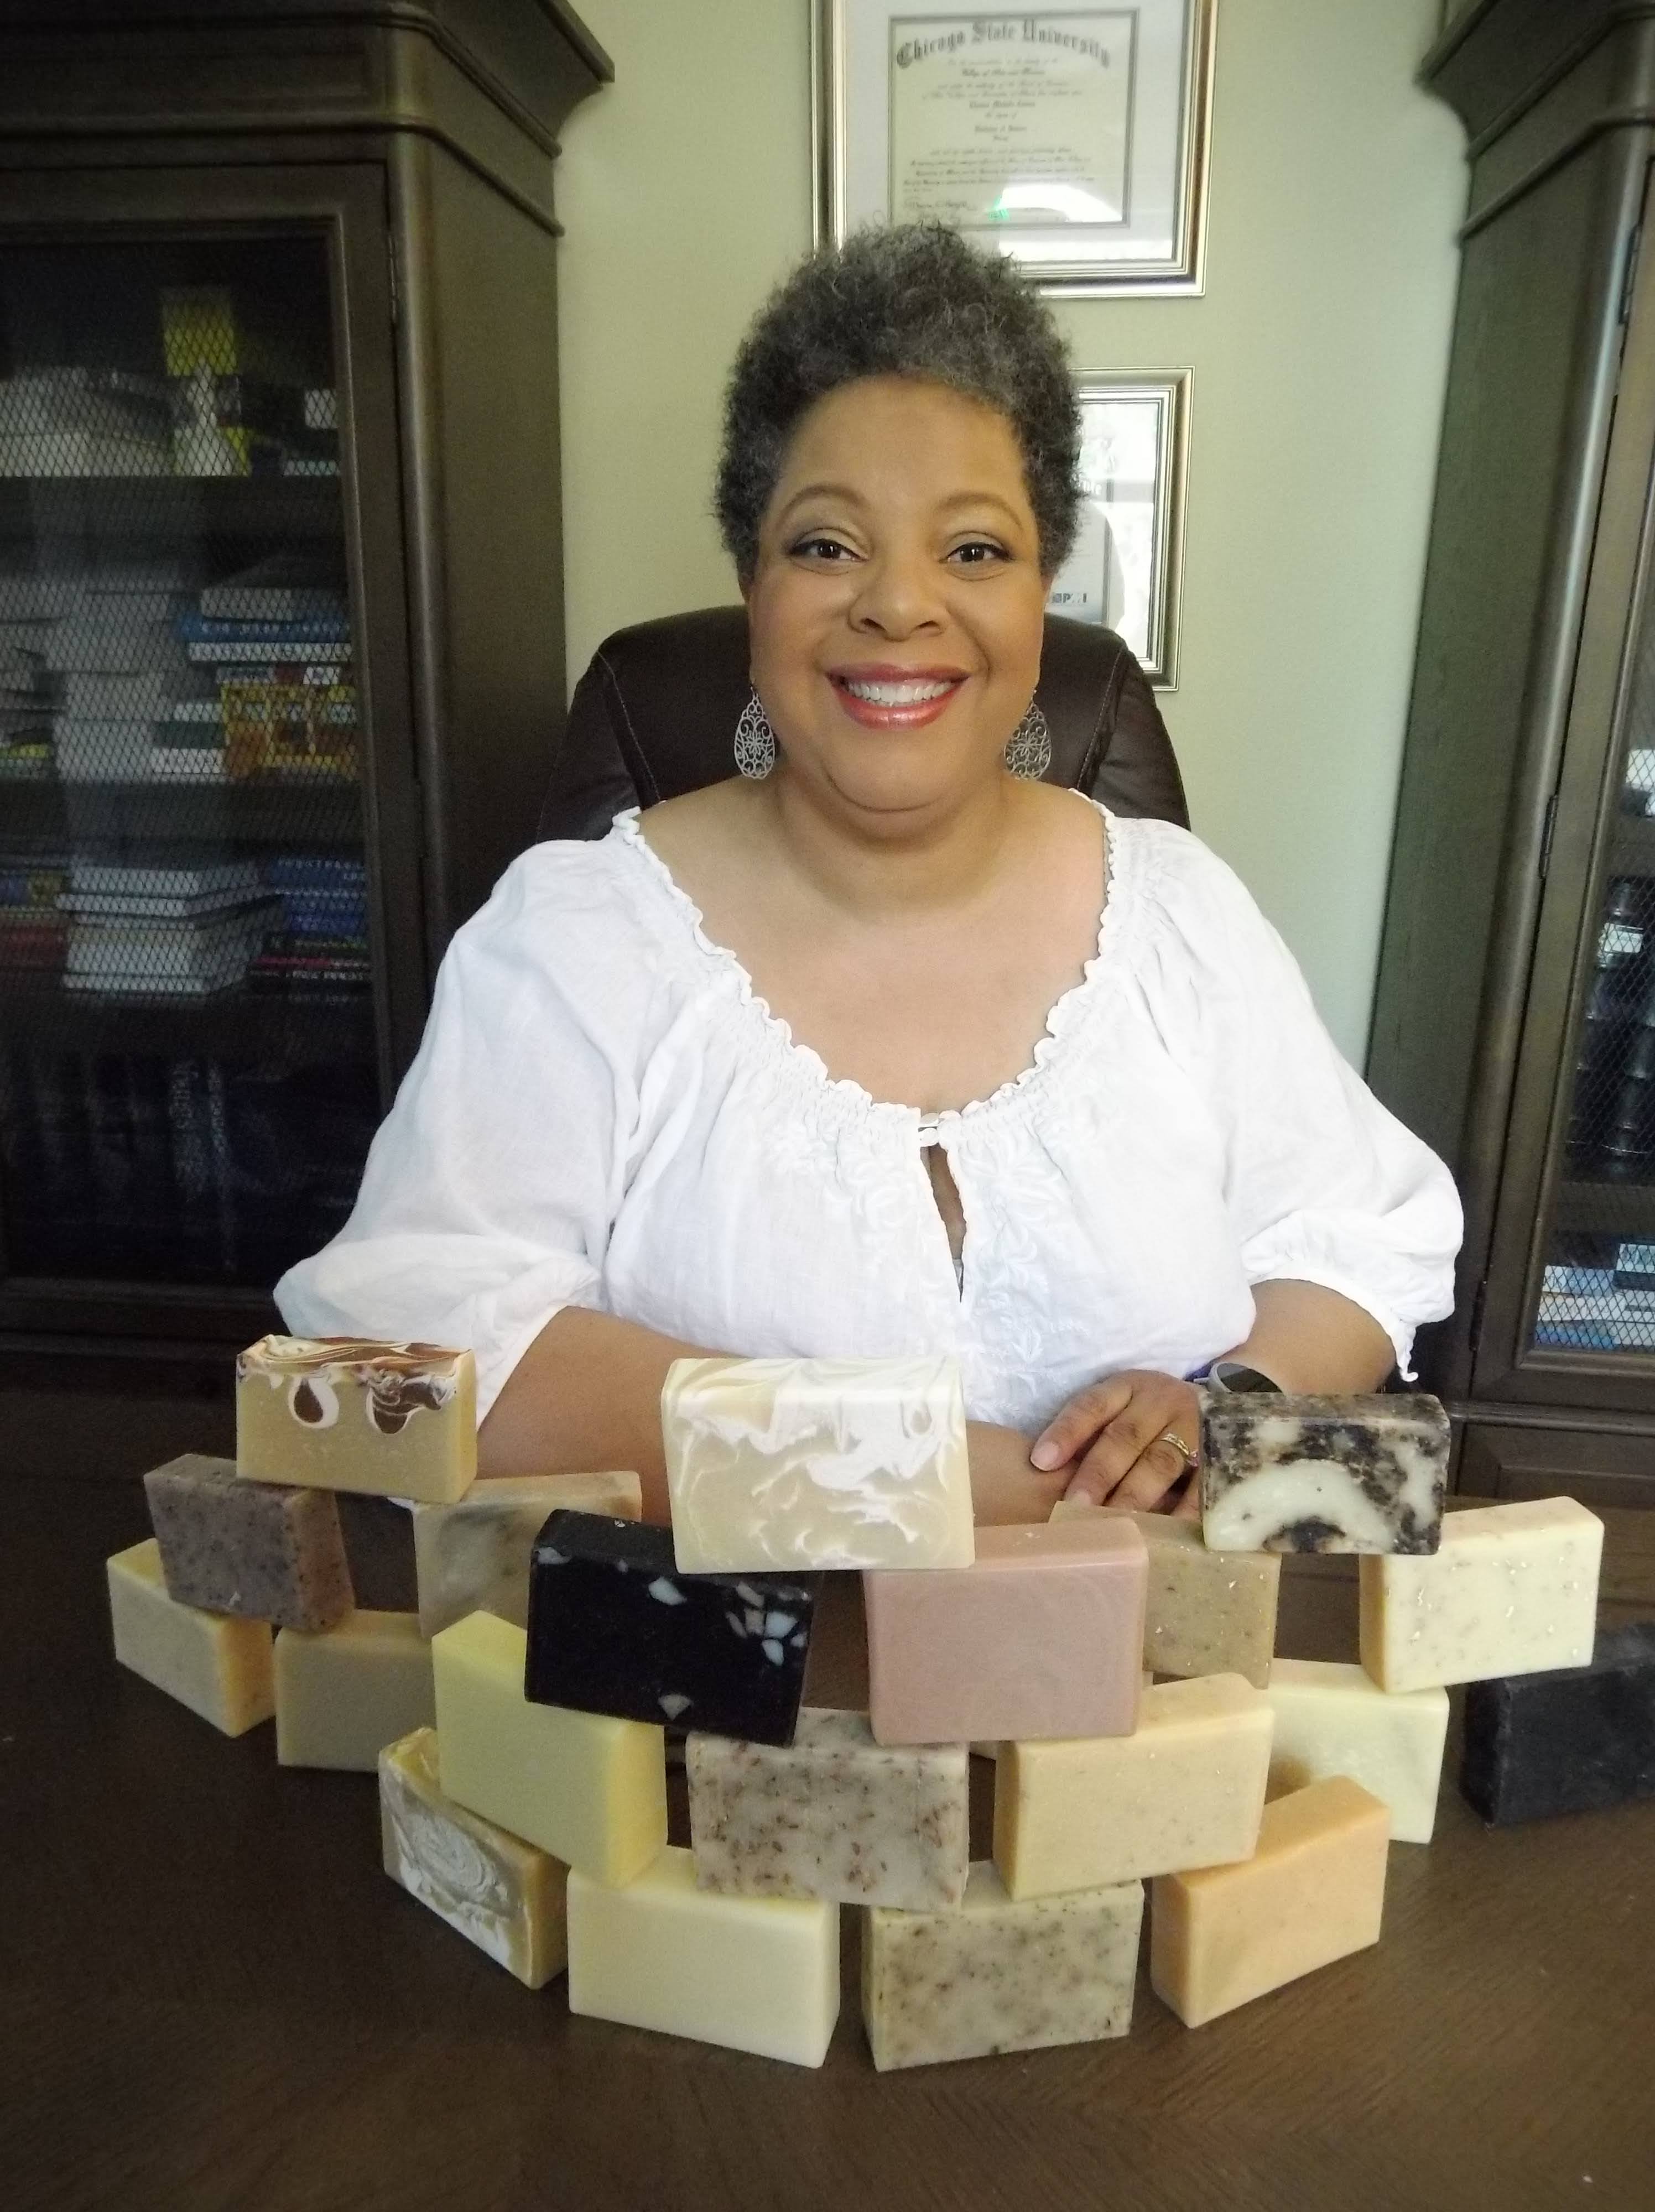 4Elements Bath Founder Charise Cowan-Leroy in a white shirt smiling behind a stacked display of brown, white, and charcoal soaps.